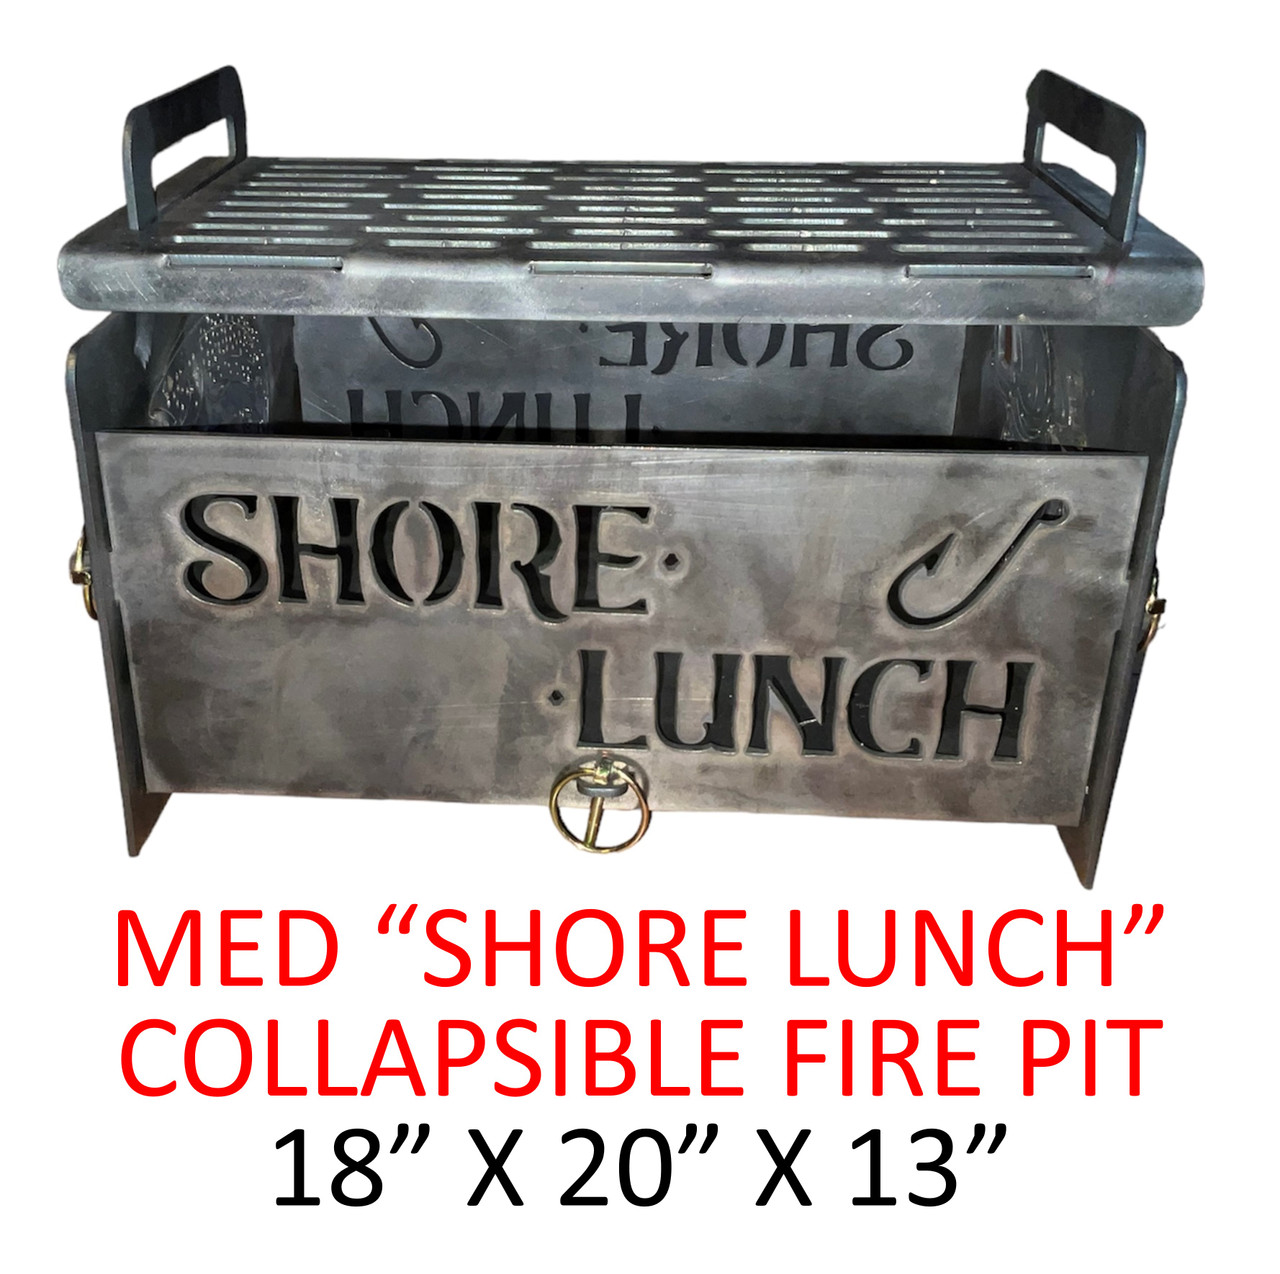 "SHORE LUNCH" Collapsible Fire Pit - Medium (18" X 20" X 13")